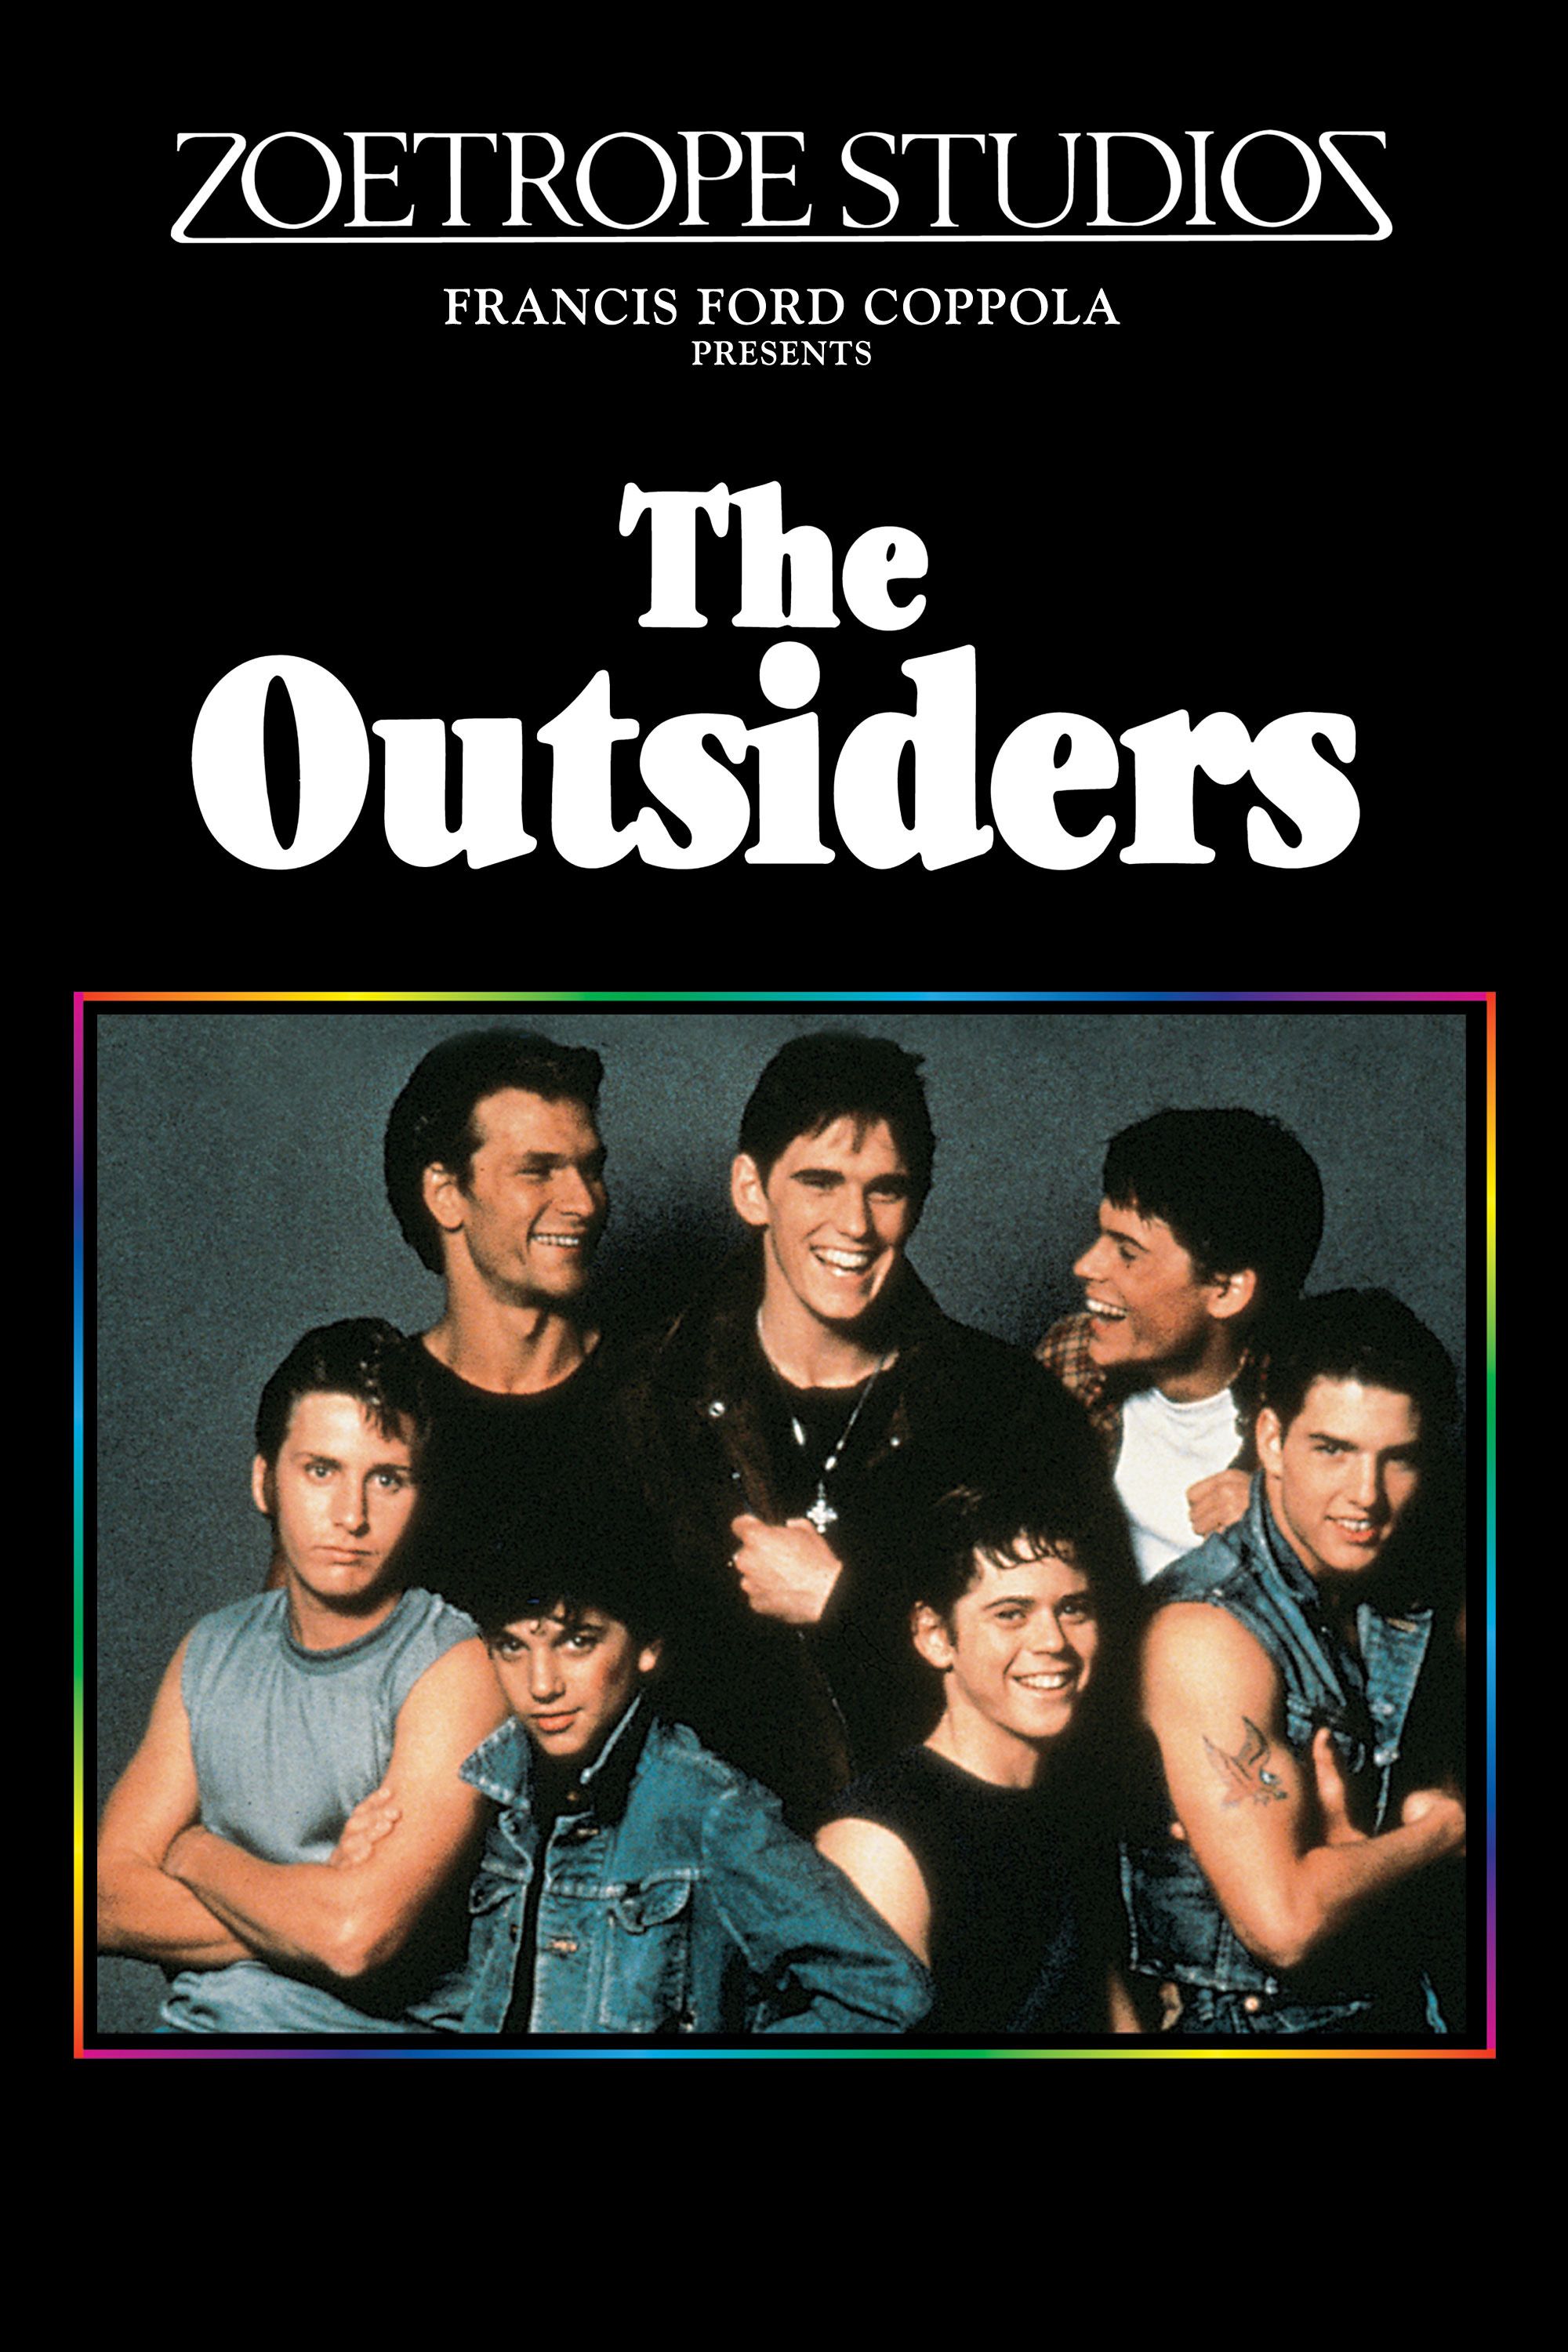 the-outsiders-book-free-download-sellinglasopa